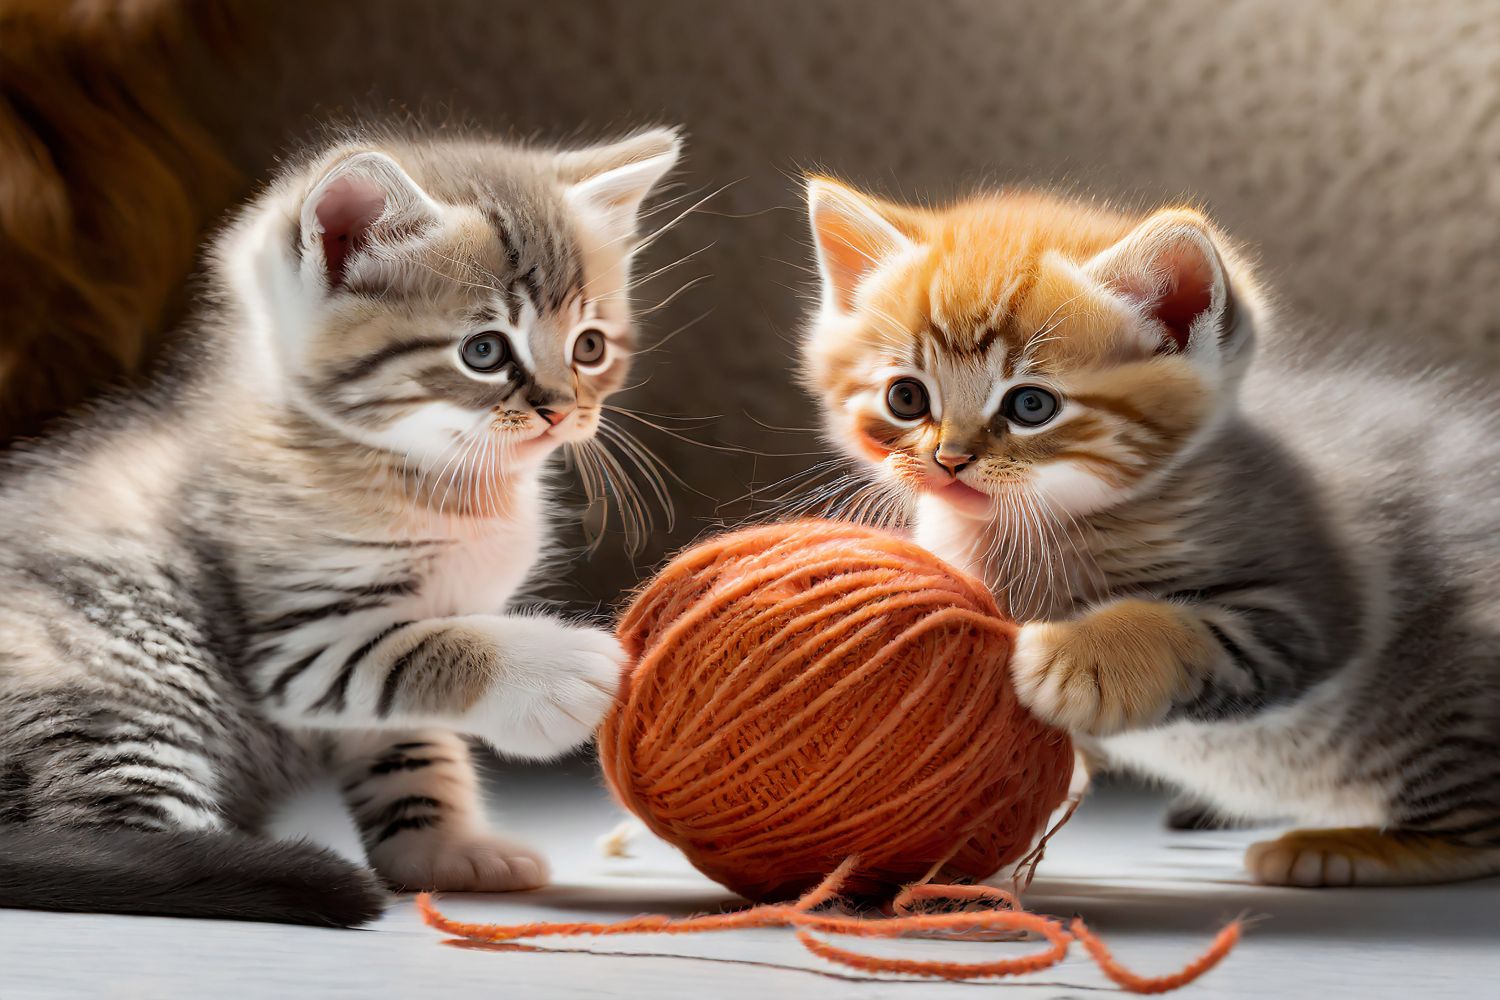 Kittens playing with a ball of wool by Martin Lawrence Photography